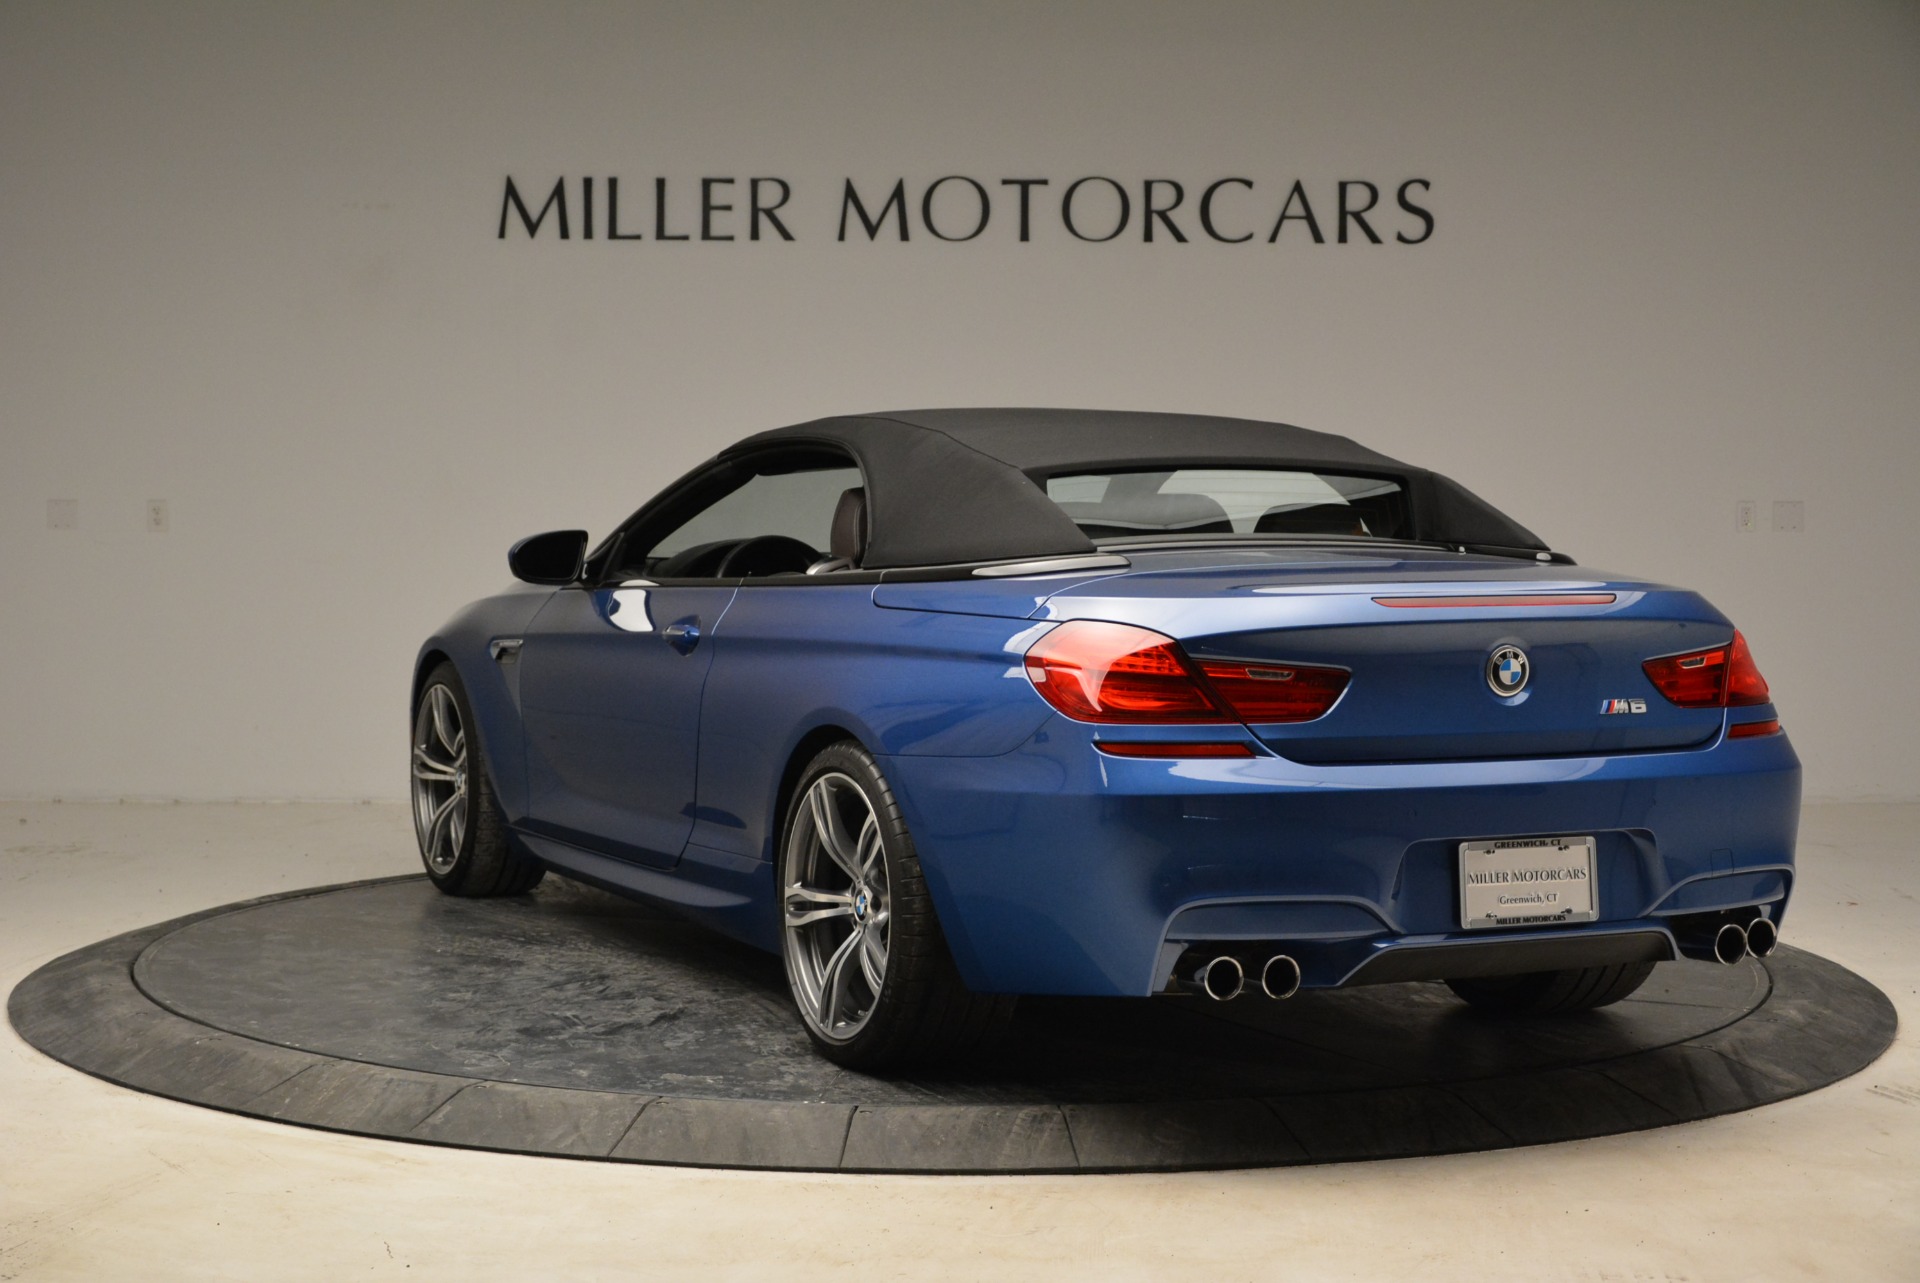 Pre Owned 13 Bmw M6 Convertible For Sale Miller Motorcars Stock 7315